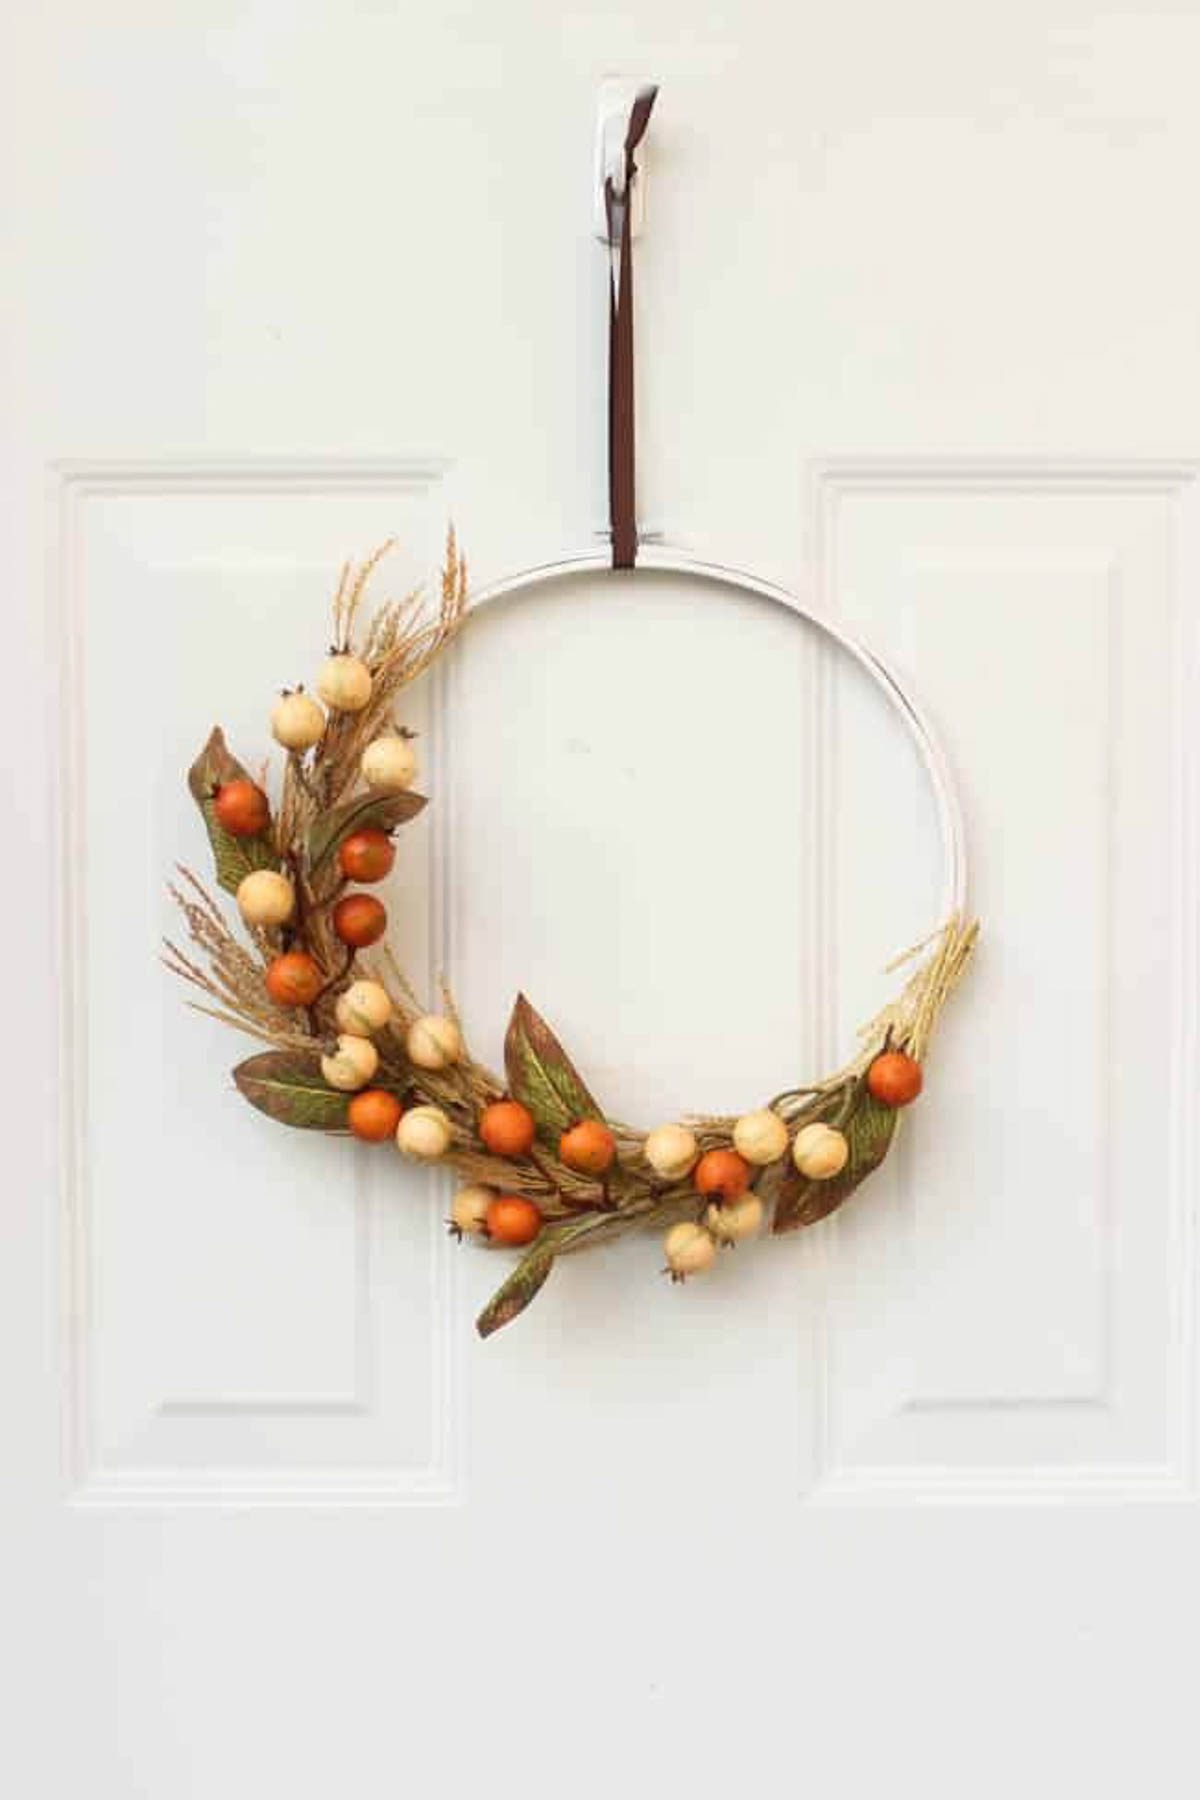 Completed autumn embroidery hoop wreath hanging on a door.